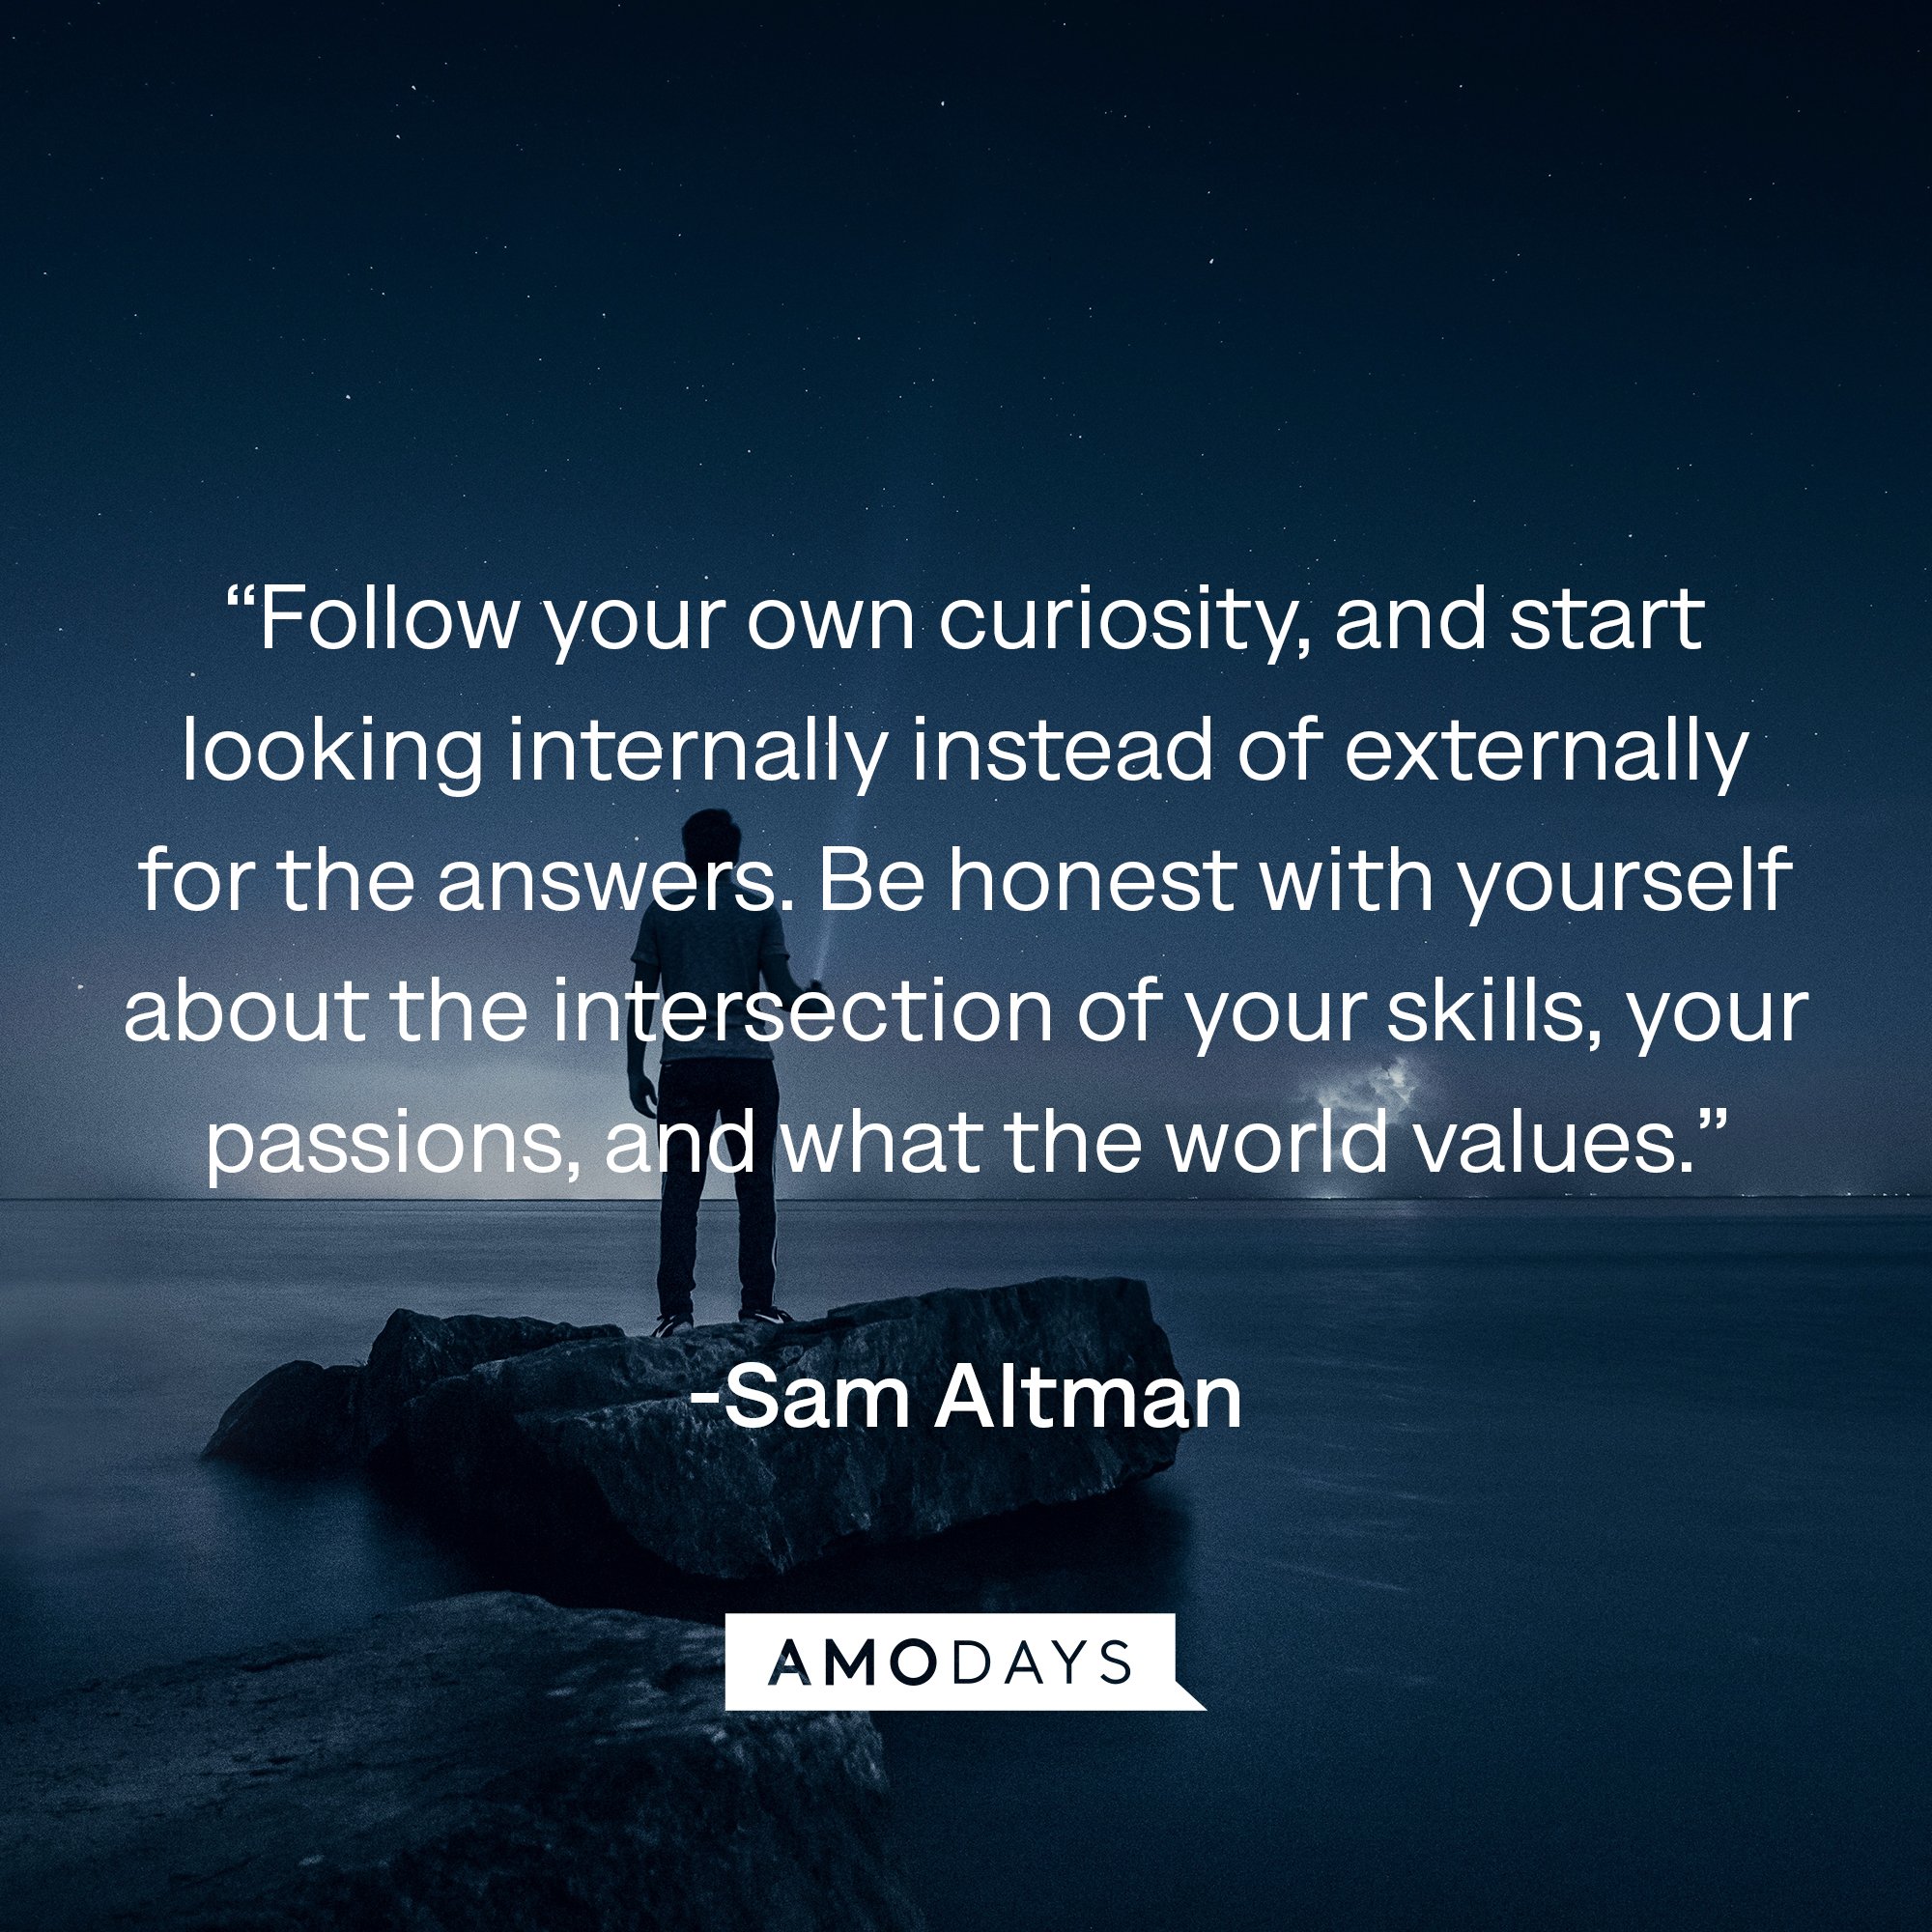 Sam Altman's quote: “Follow your own curiosity, and start looking internally instead of externally for the answers. Be honest with yourself about the intersection of your skills, your passions, and what the world values.” | Image: AmoDays